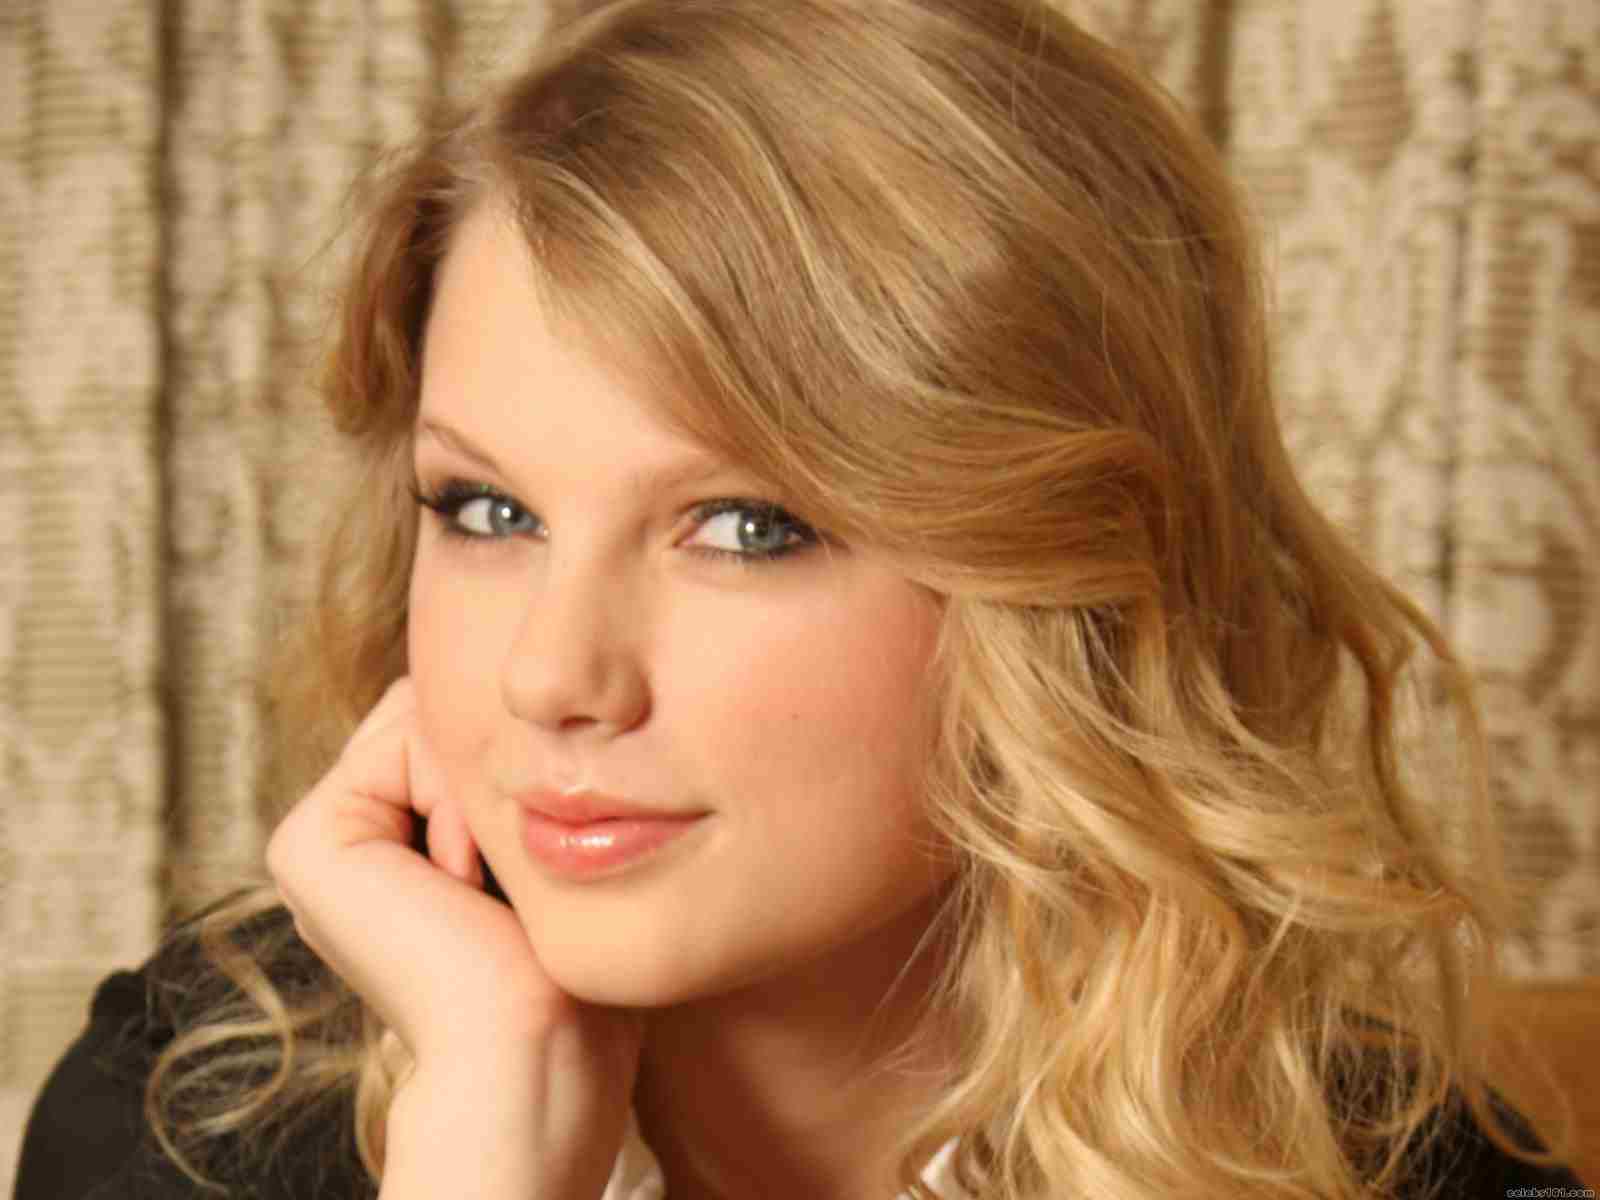 Taylor Swift Biography - Age, DOB, Height, Family, Career, Awards ...